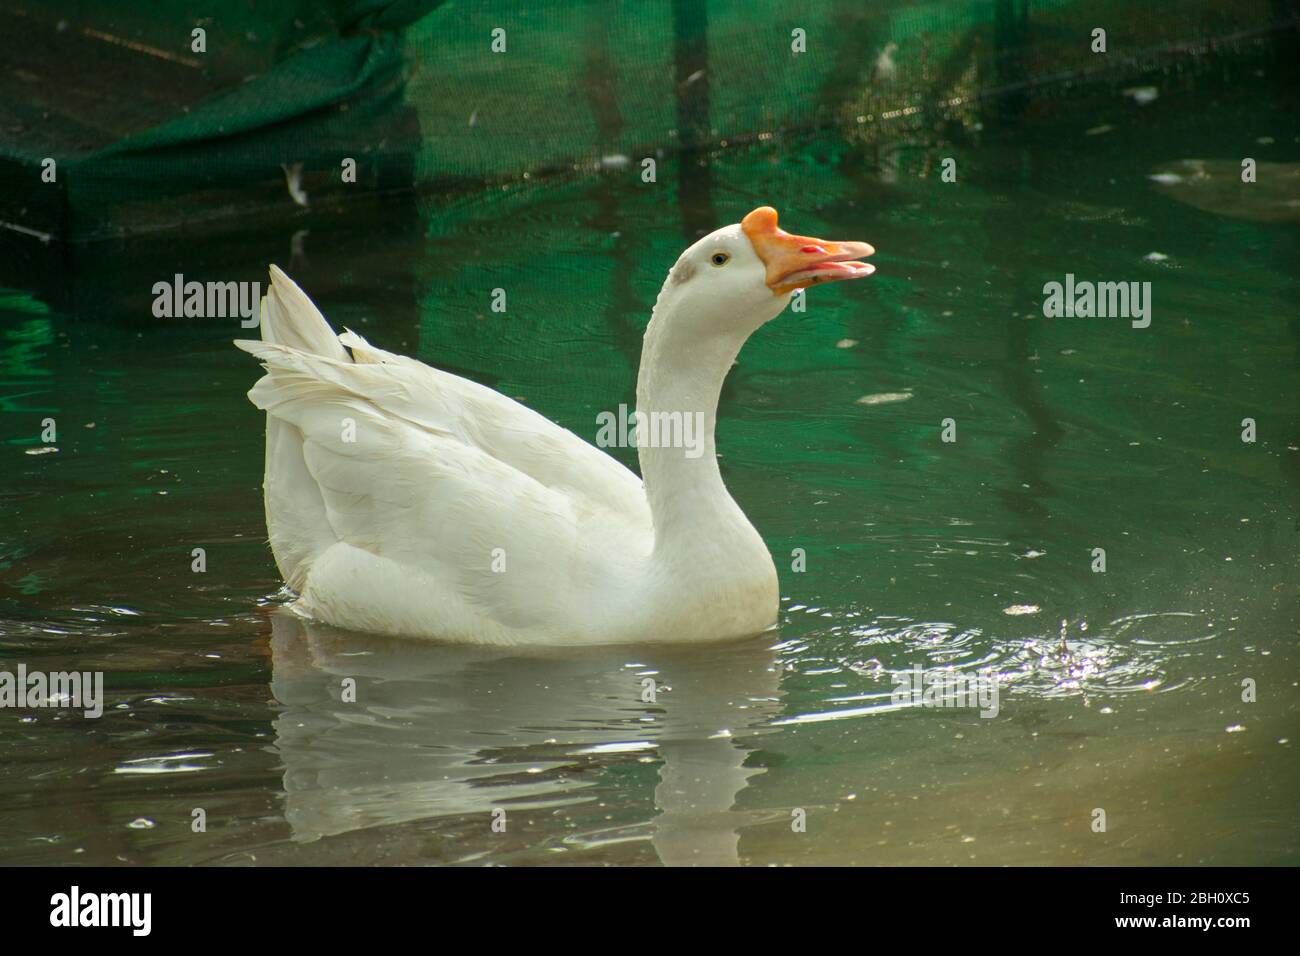 White Domestic Duck in Lake Pond Water Stock Photo